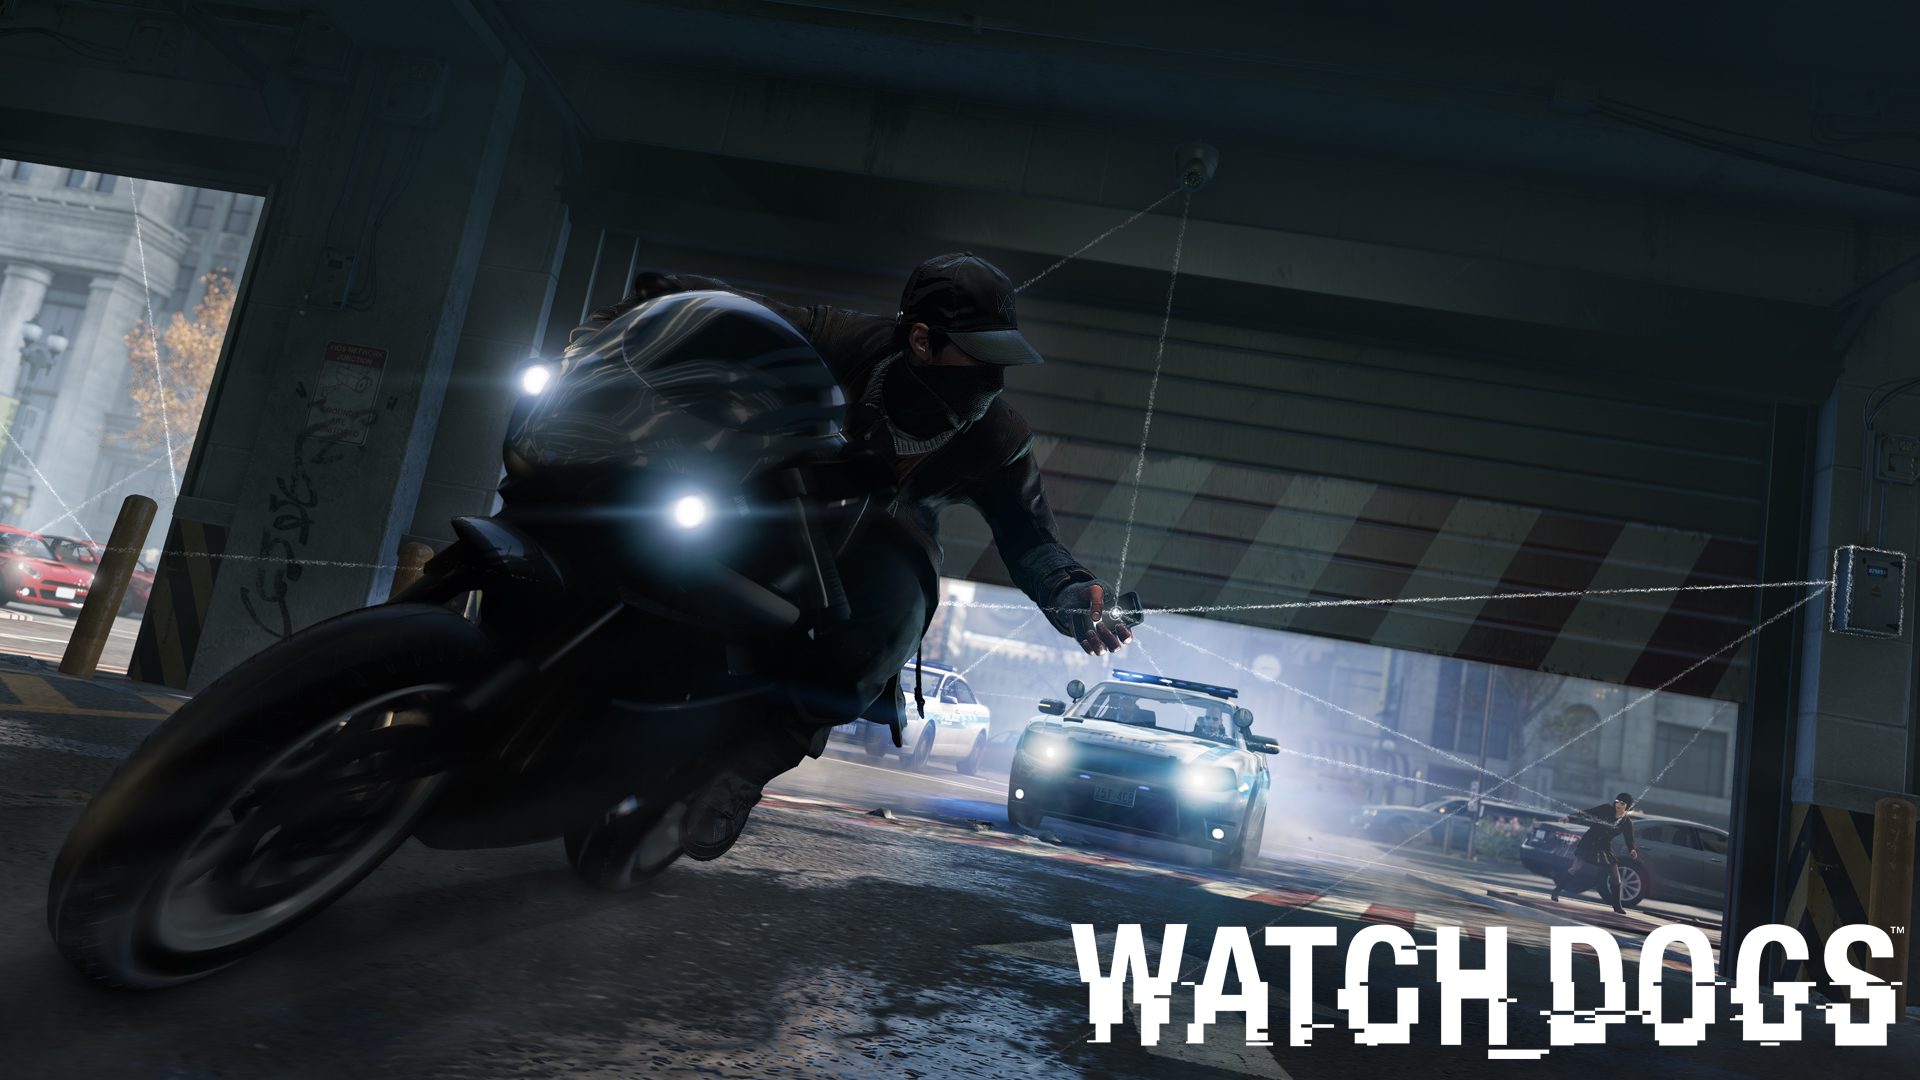 Video Game Watch Dogs 1920x1080